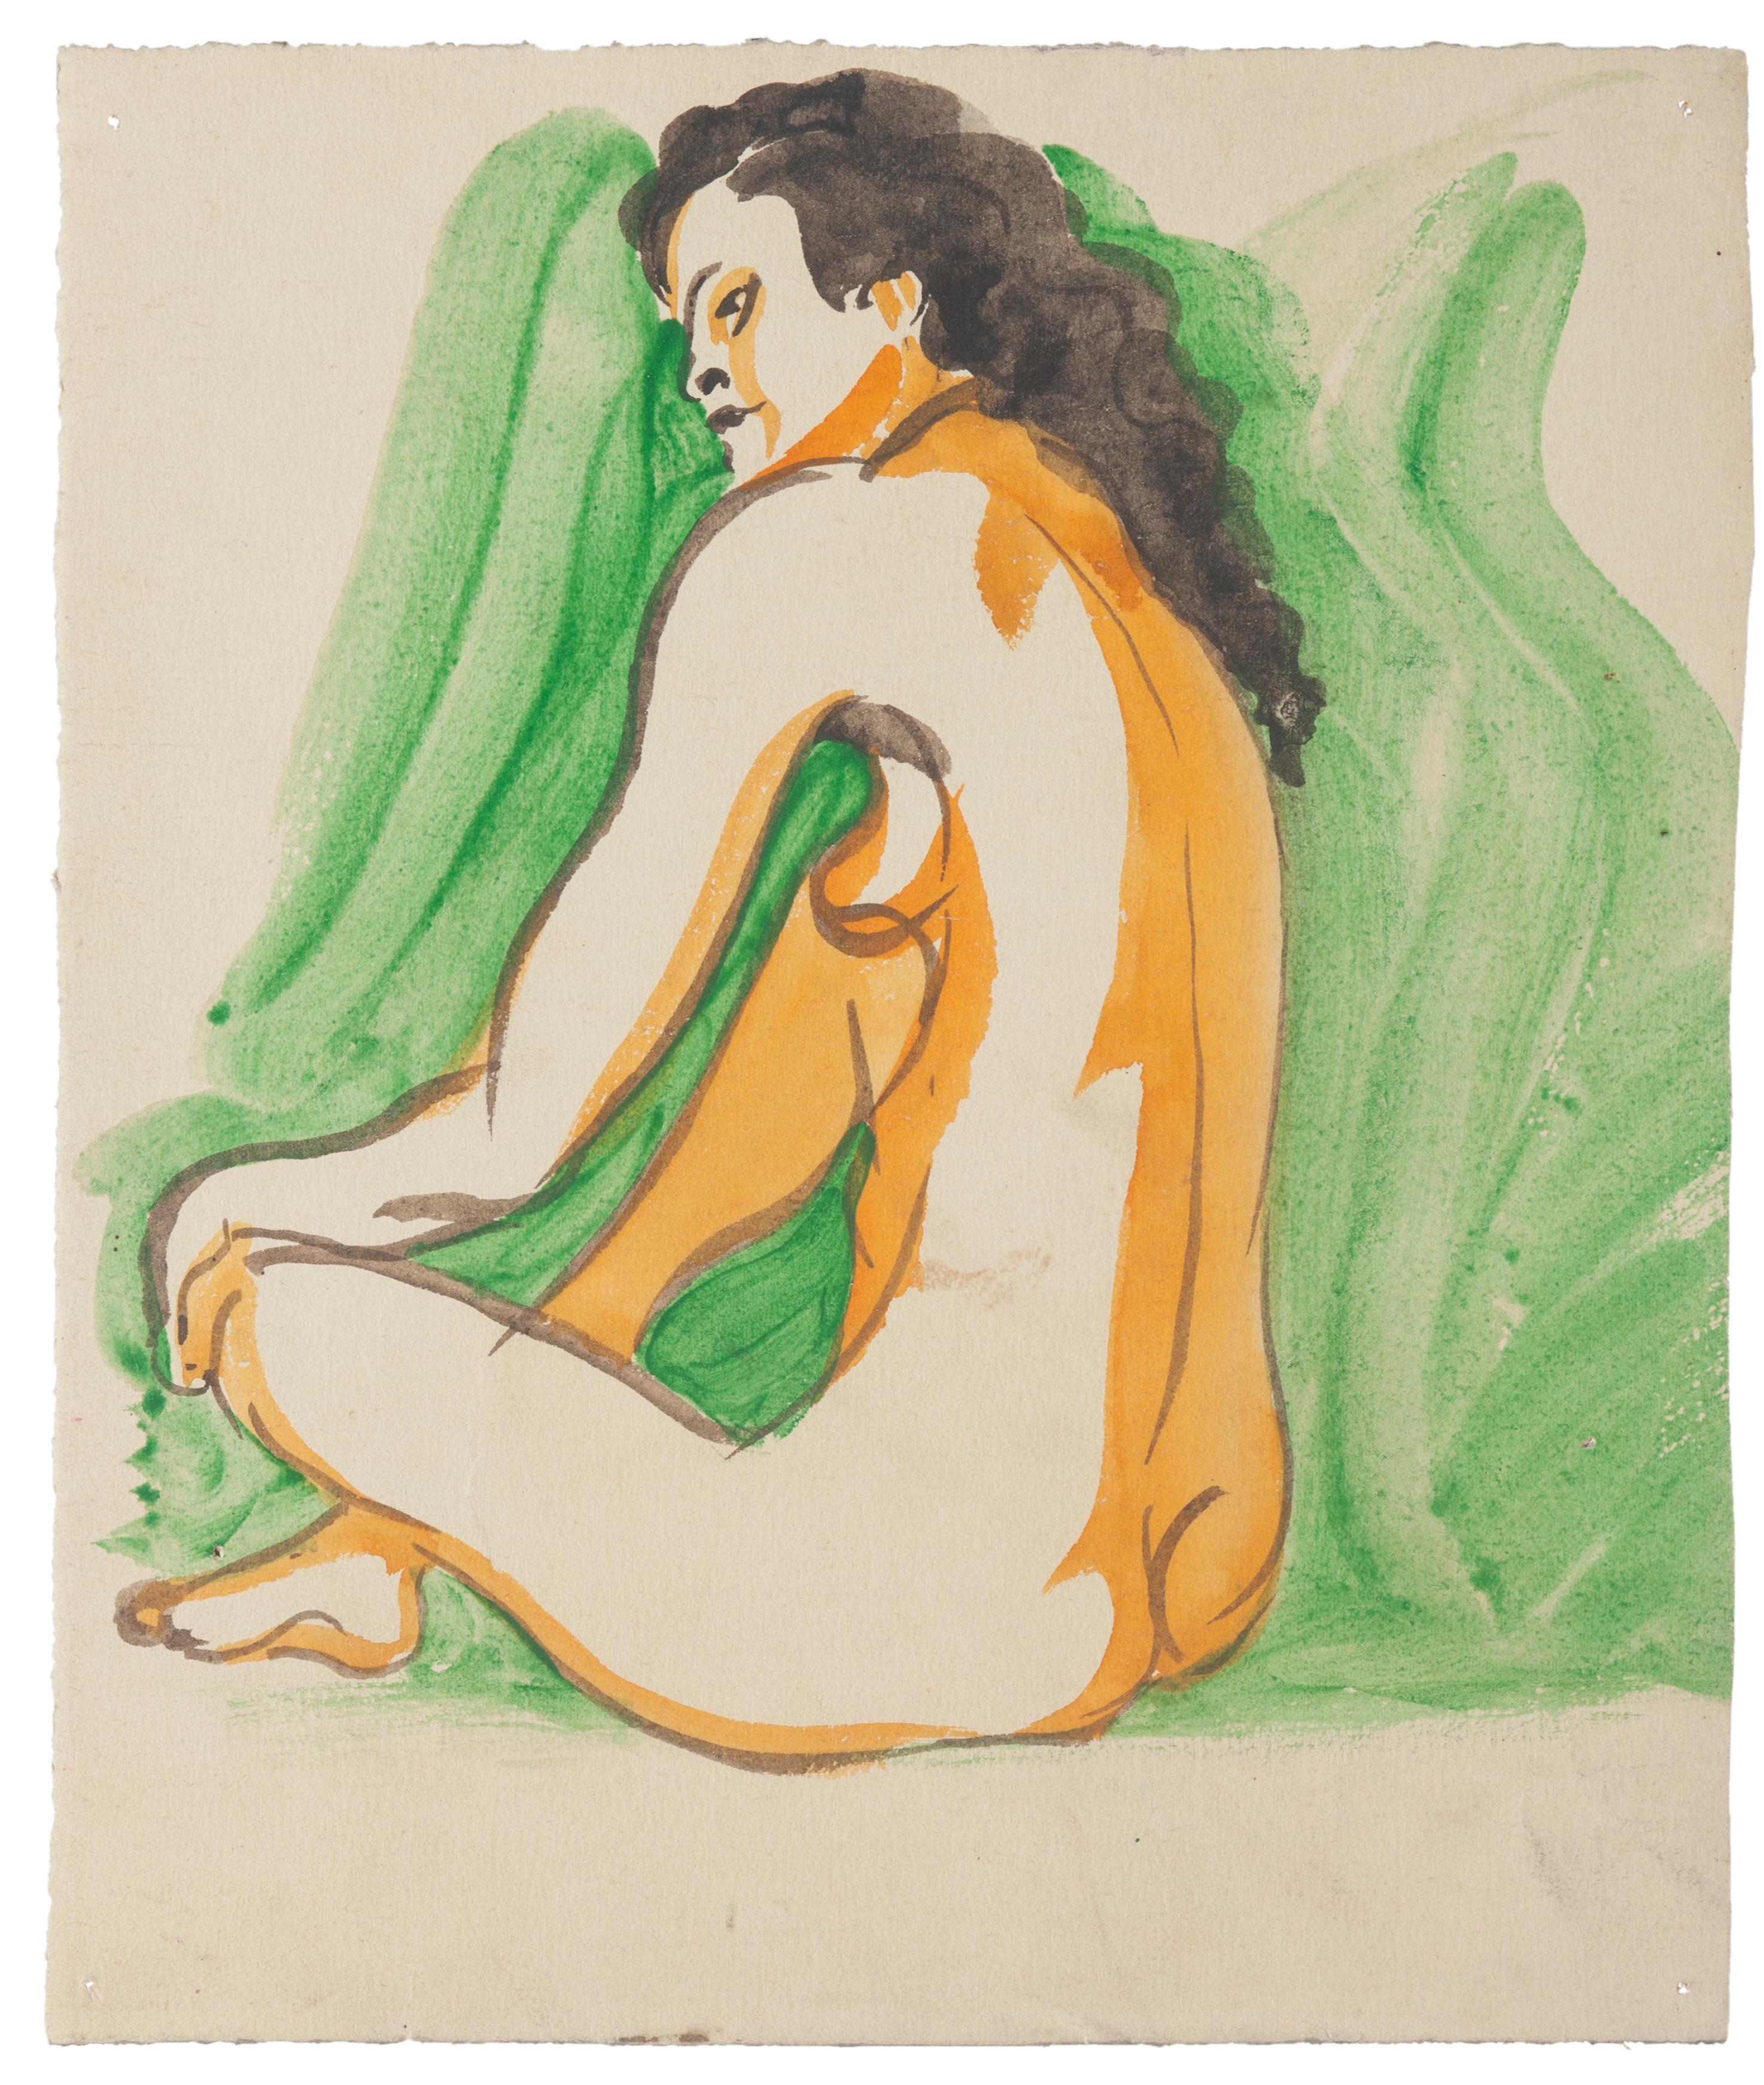 Nude 1935's is an original drawing in tempera and watercolor on paper, realized by Jean Delpech (1988-1916). 

On the back of the drawing, an inscription in French "Le décors Puy de Dame" made in red watercolor, on the lower right.

Sheet dimension: